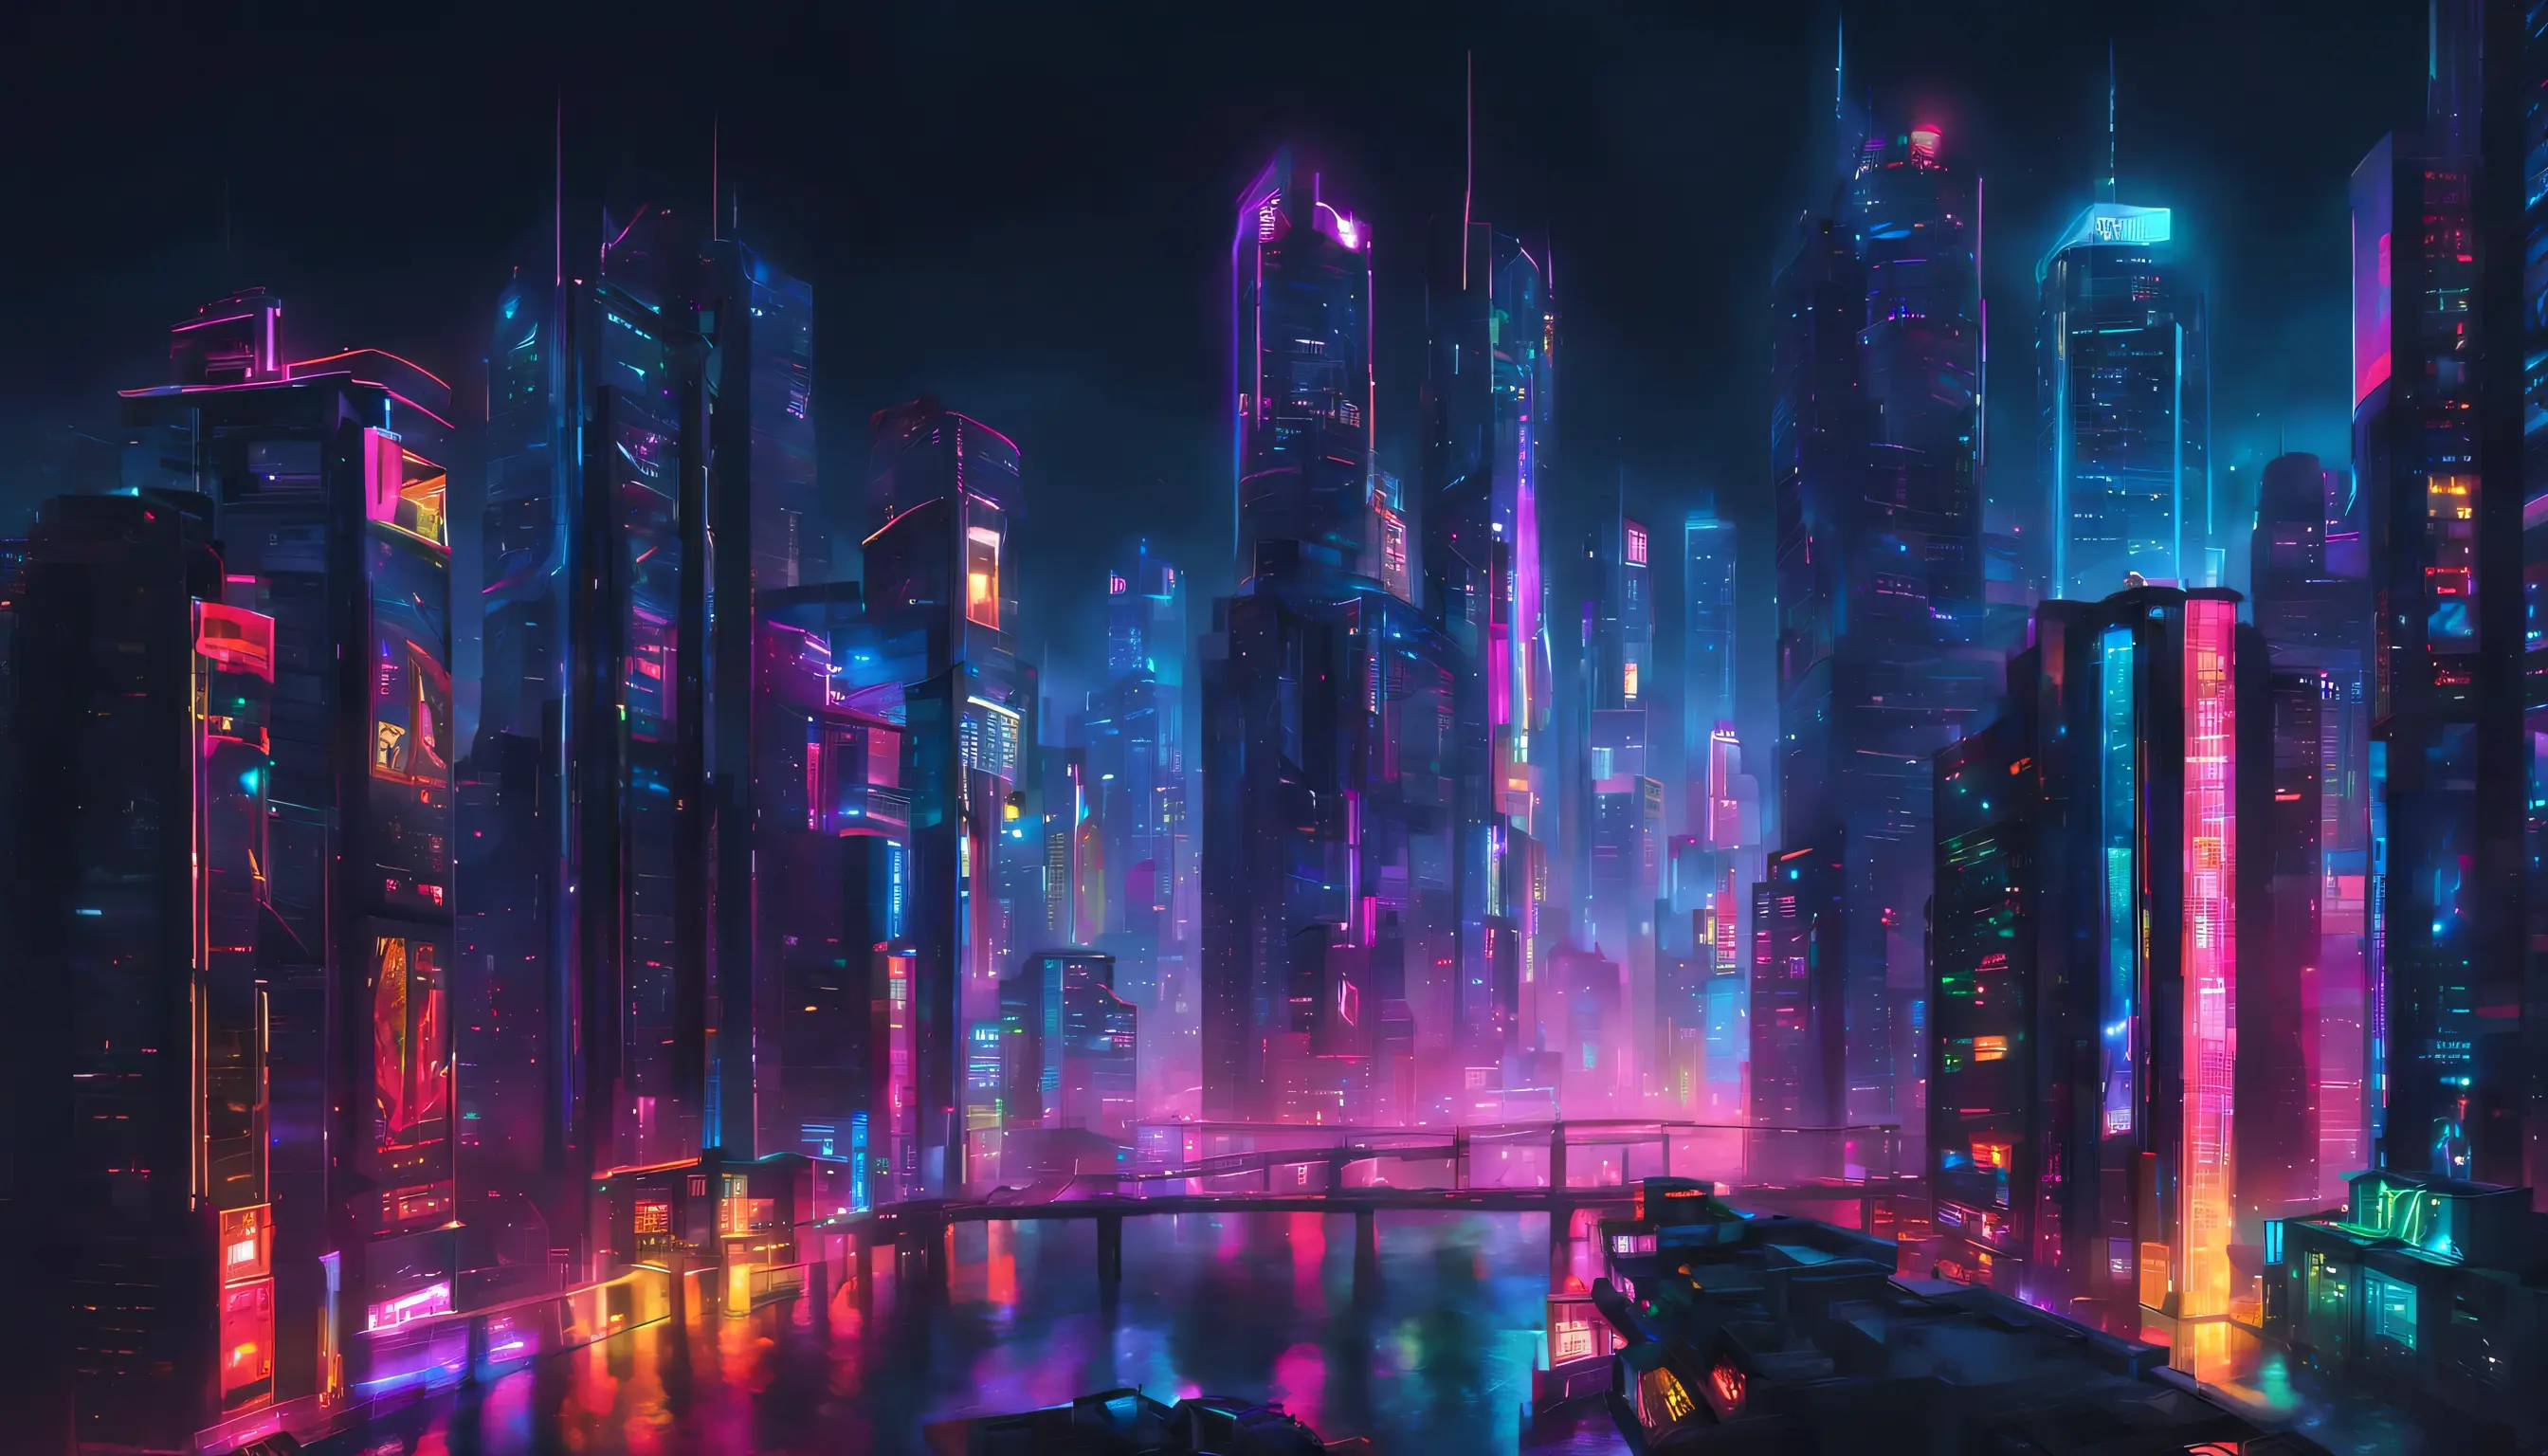 cyberpunk city, neon lights, colorful, skyscrappers, night